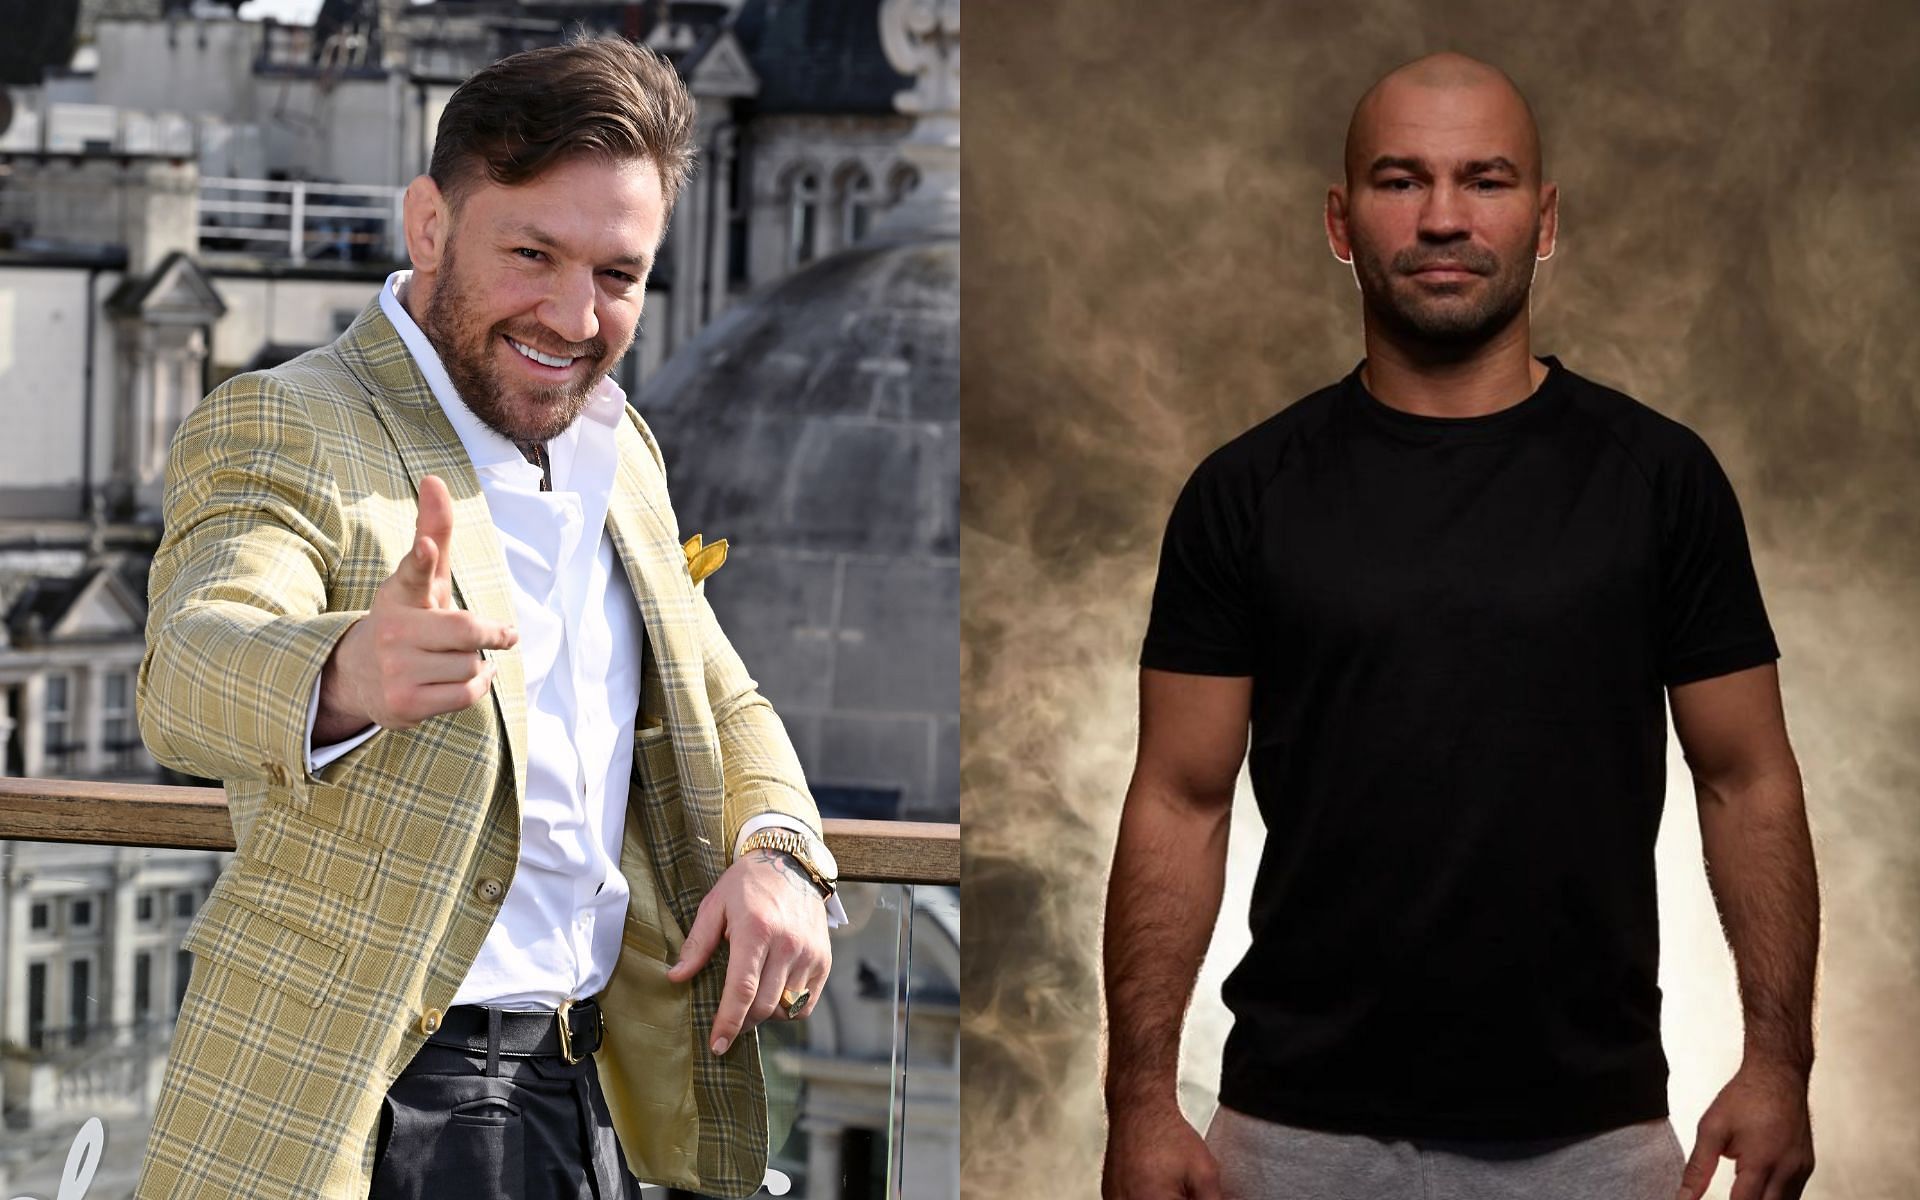 Conor McGregor (left) and Artem Lobov (right) were known to be close friends until their legal battle came to the fore in 2022 [Images courtesy: Getty Images and @rushammer on Instagram]